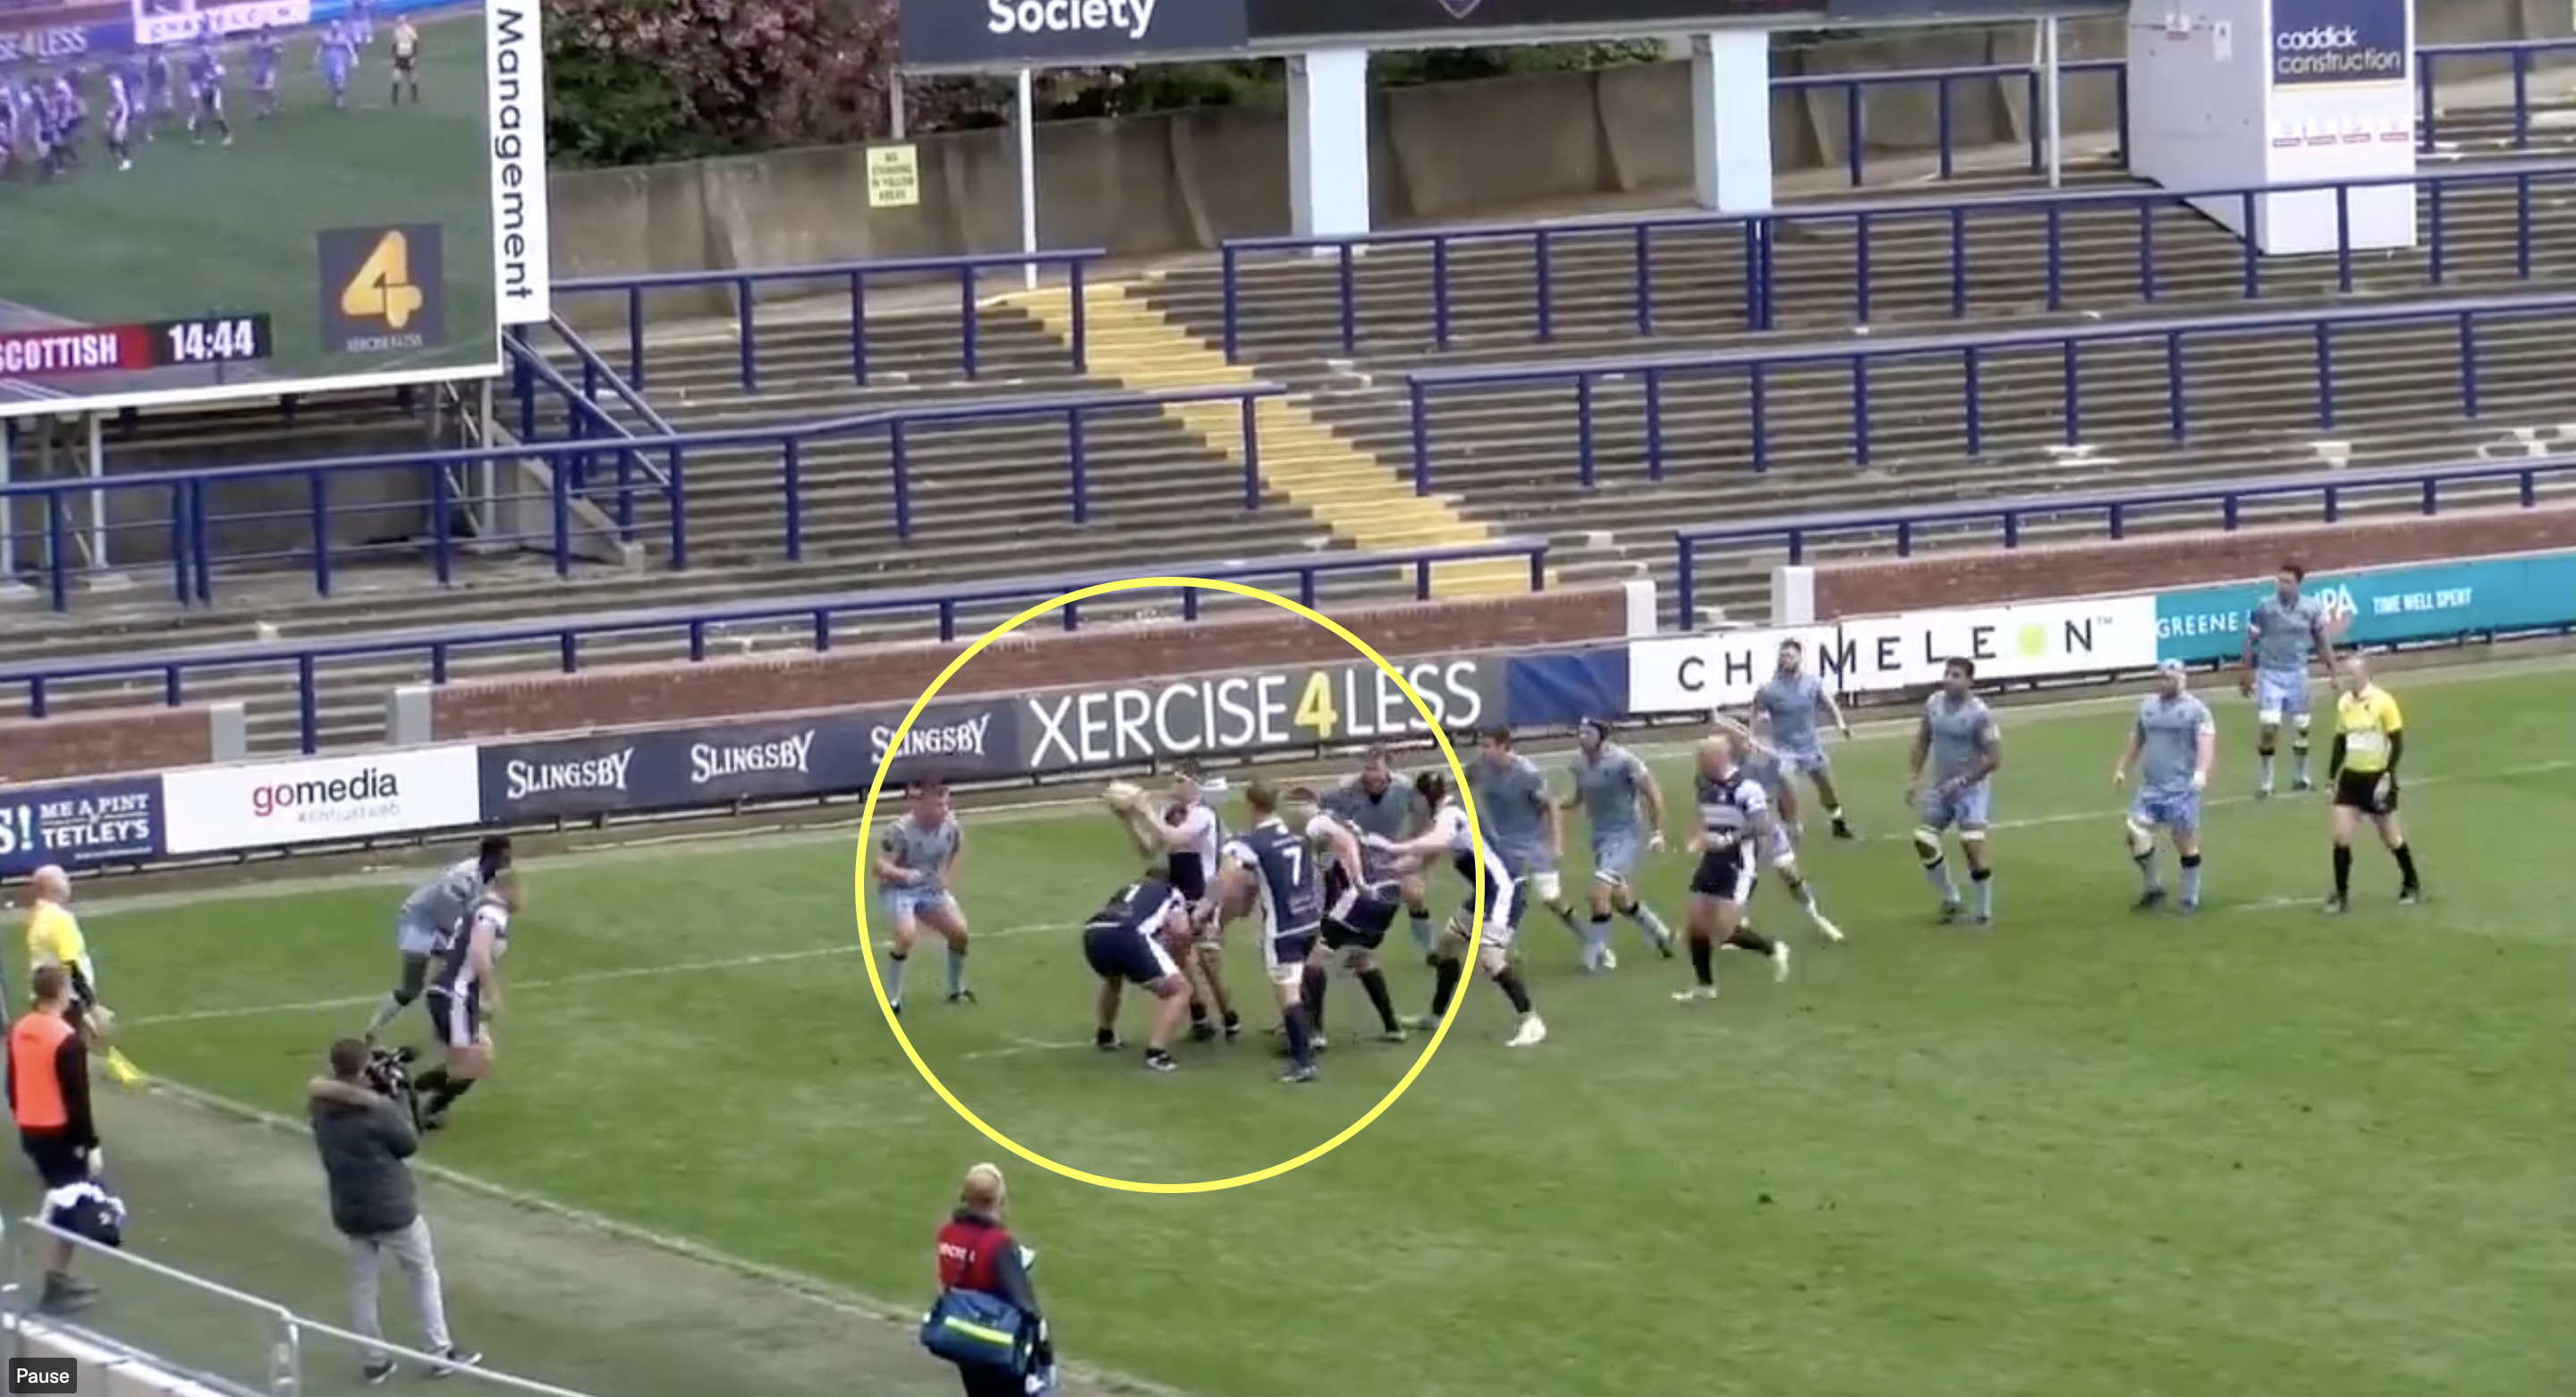 The bizarre 90 seconds where rugby accidentally broke goes viral